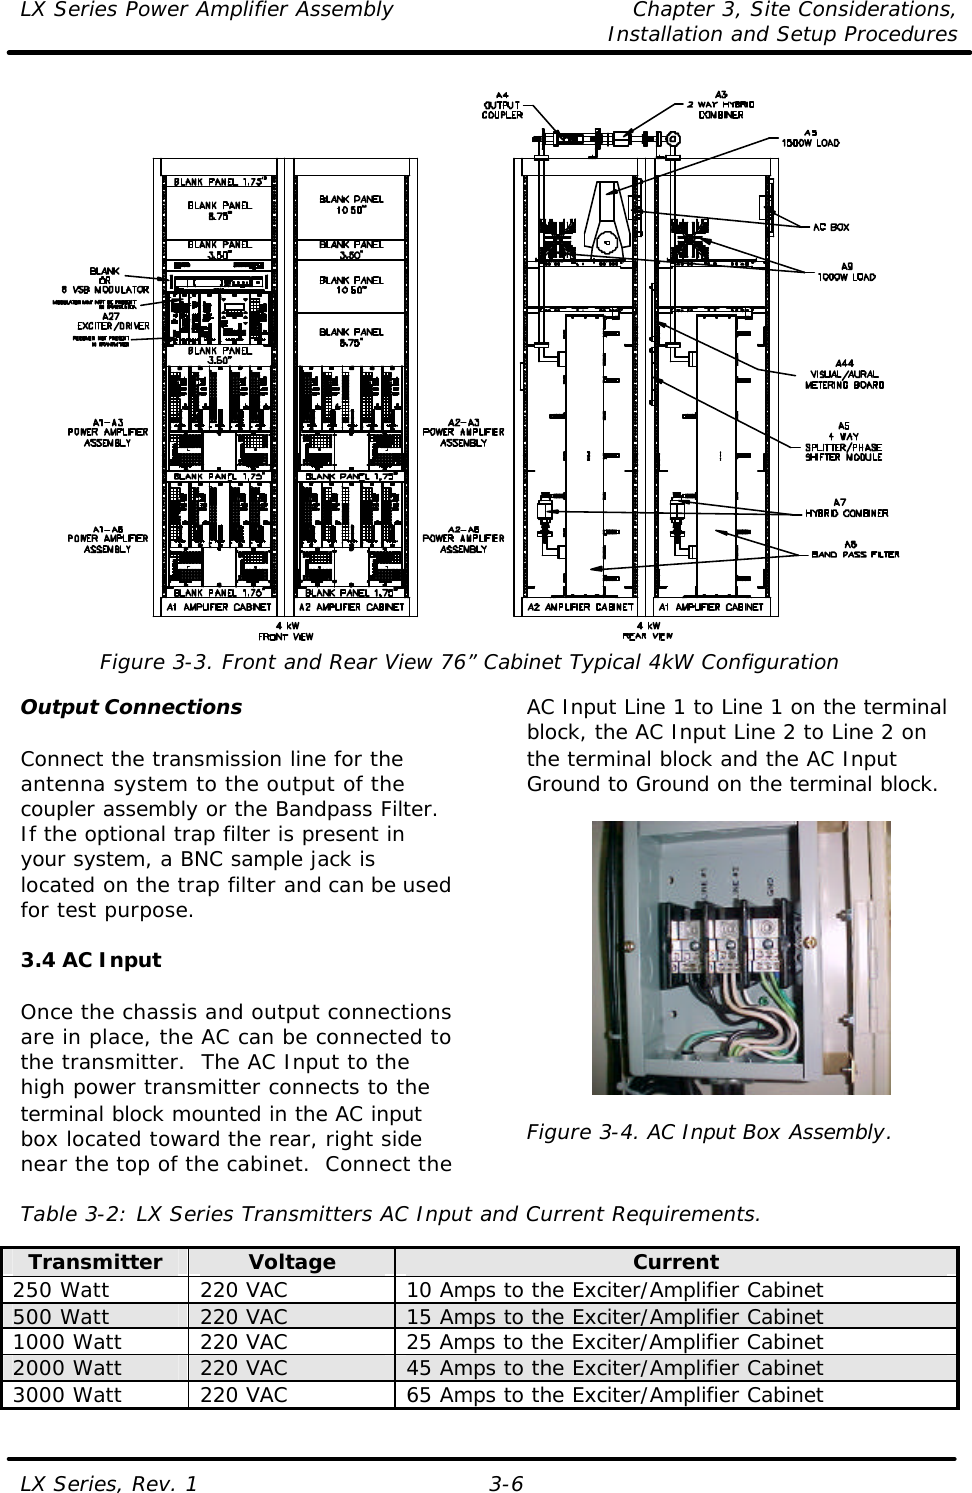 LX Series Power Amplifier Assembly Chapter 3, Site Considerations,   Installation and Setup Procedures LX Series, Rev. 1 3-6  Figure 3-3. Front and Rear View 76” Cabinet Typical 4kW Configuration  Output Connections  Connect the transmission line for the antenna system to the output of the coupler assembly or the Bandpass Filter.  If the optional trap filter is present in your system, a BNC sample jack is located on the trap filter and can be used for test purpose.  3.4 AC Input  Once the chassis and output connections are in place, the AC can be connected to the transmitter.  The AC Input to the high power transmitter connects to the terminal block mounted in the AC input box located toward the rear, right side near the top of the cabinet.  Connect the AC Input Line 1 to Line 1 on the terminal block, the AC Input Line 2 to Line 2 on the terminal block and the AC Input Ground to Ground on the terminal block.    Figure 3-4. AC Input Box Assembly.  Table 3-2: LX Series Transmitters AC Input and Current Requirements.  Transmitter Voltage Current 250 Watt 220 VAC 10 Amps to the Exciter/Amplifier Cabinet 500 Watt 220 VAC 15 Amps to the Exciter/Amplifier Cabinet 1000 Watt 220 VAC 25 Amps to the Exciter/Amplifier Cabinet 2000 Watt 220 VAC 45 Amps to the Exciter/Amplifier Cabinet 3000 Watt 220 VAC 65 Amps to the Exciter/Amplifier Cabinet 